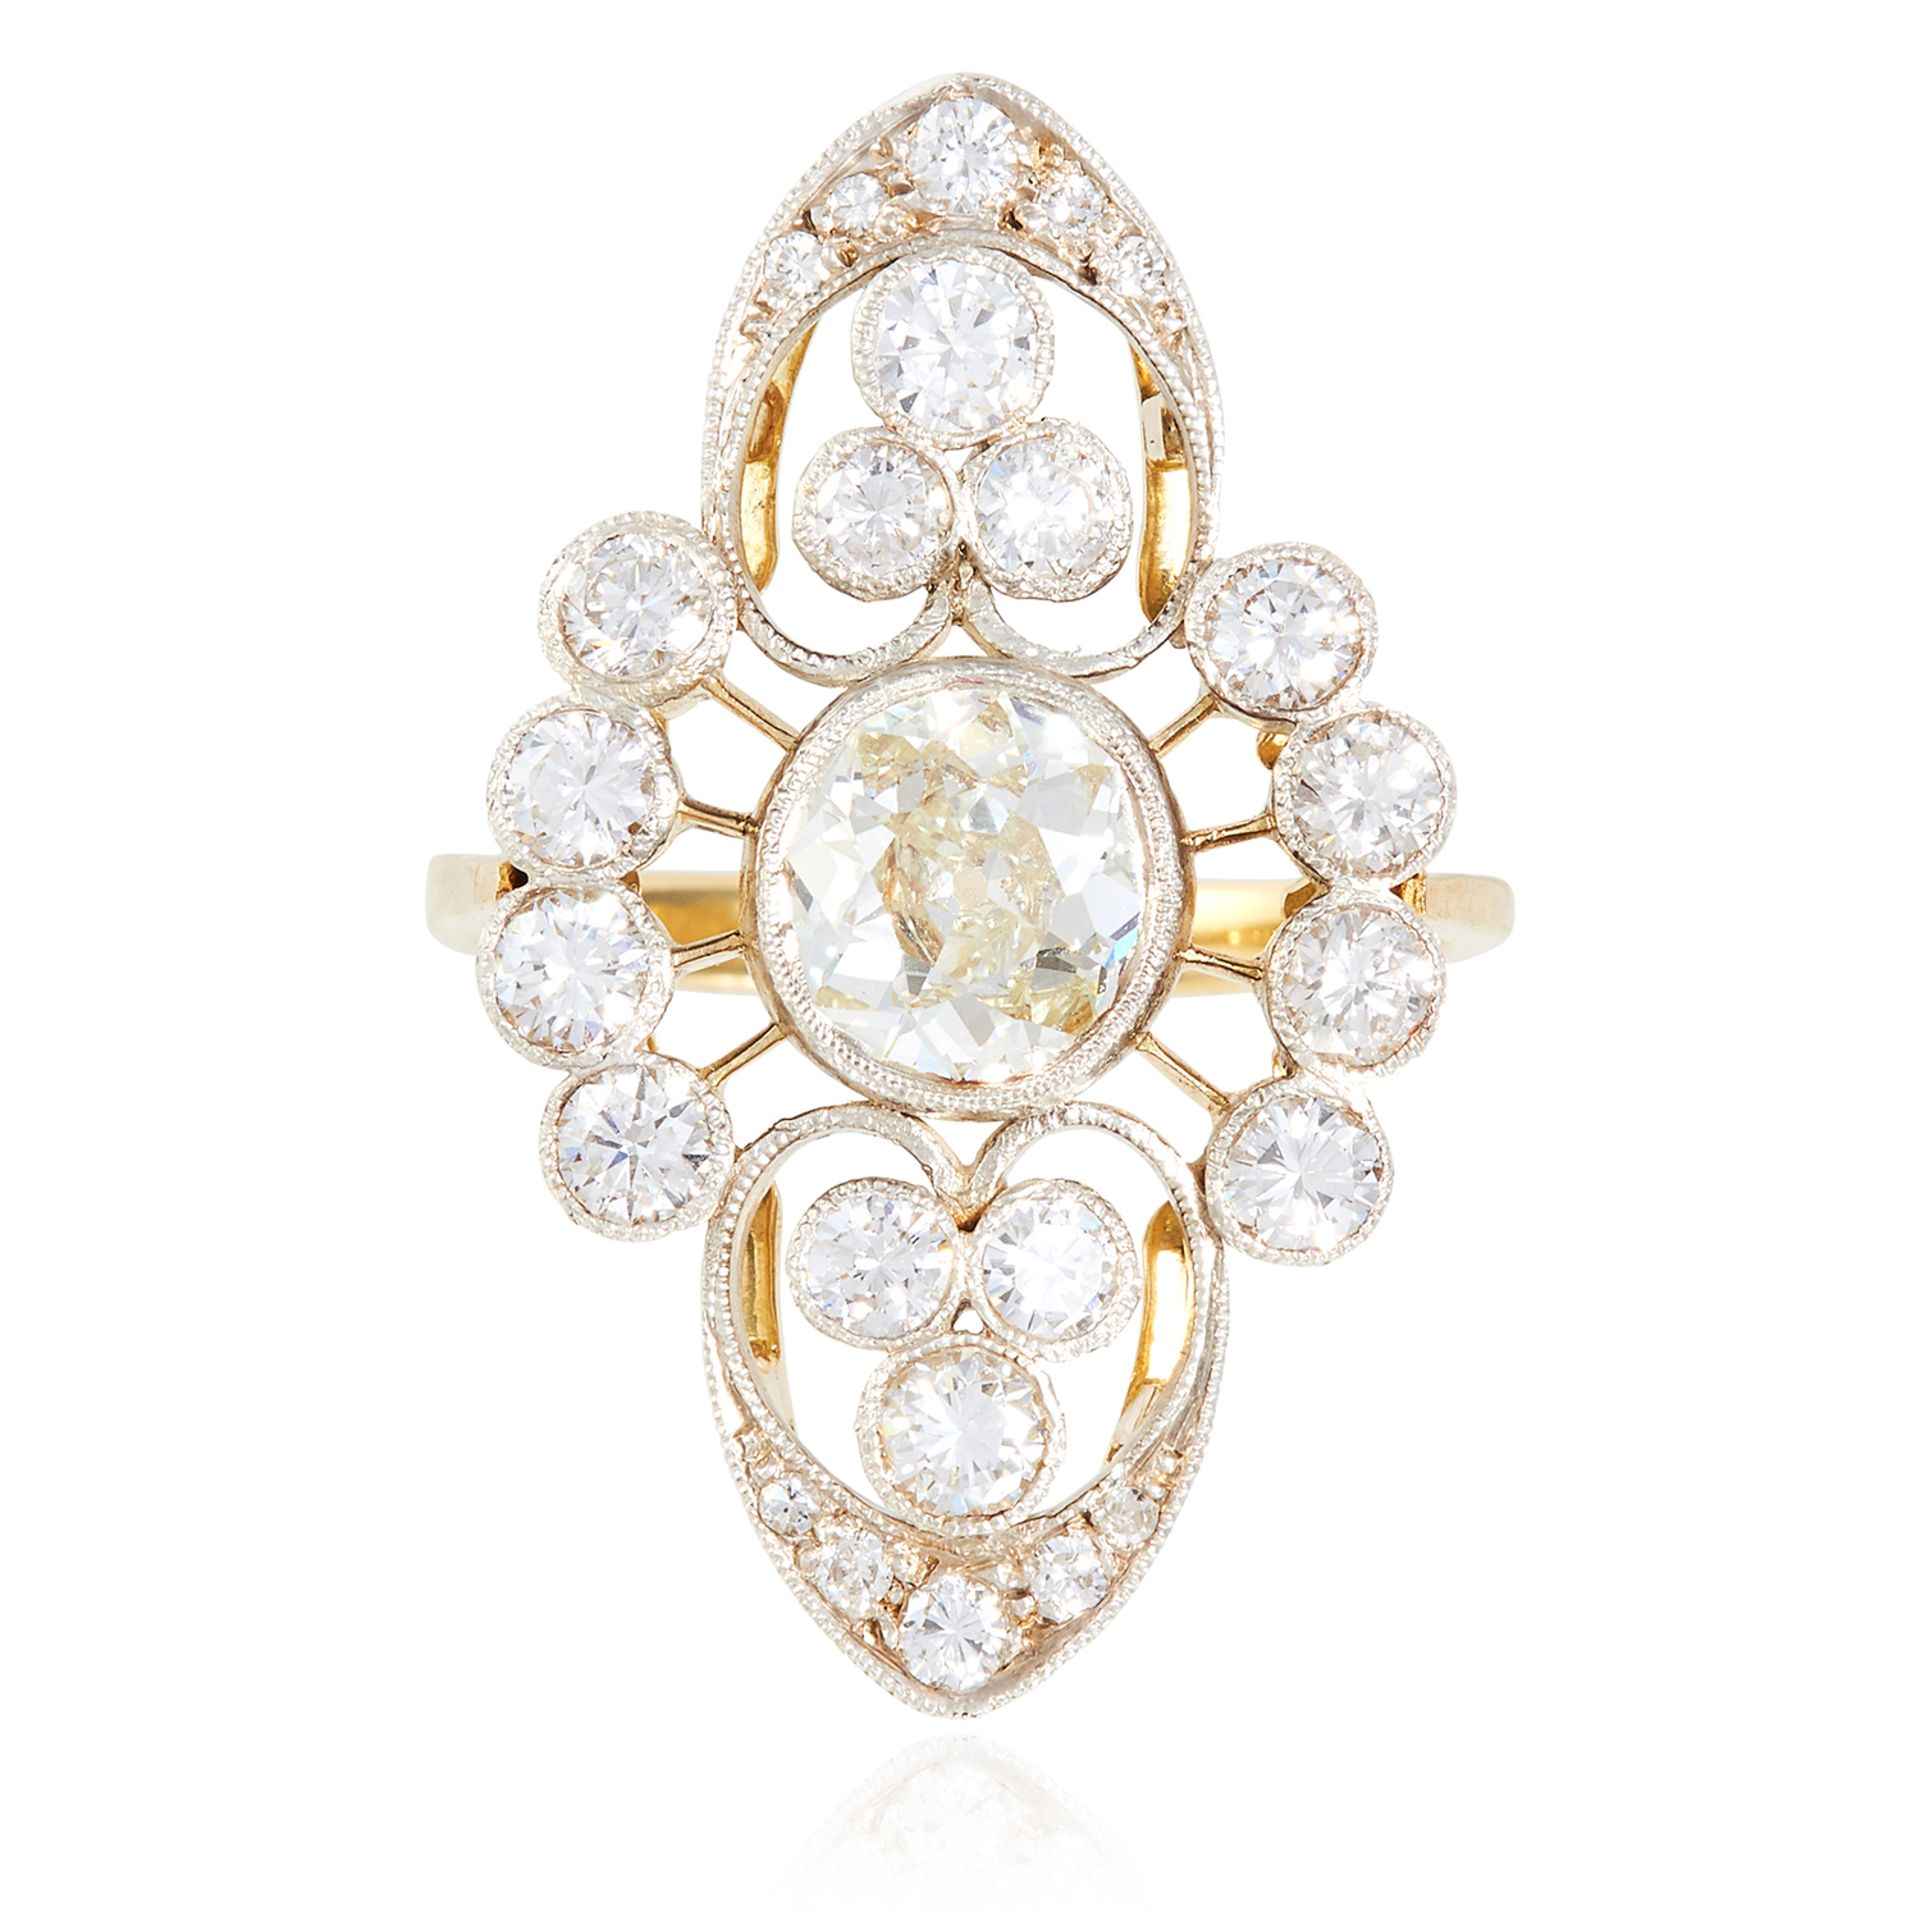 A 4.07 CARAT DIAMOND DRESS RING in yellow gold, the open scrolling frame is set with a central old